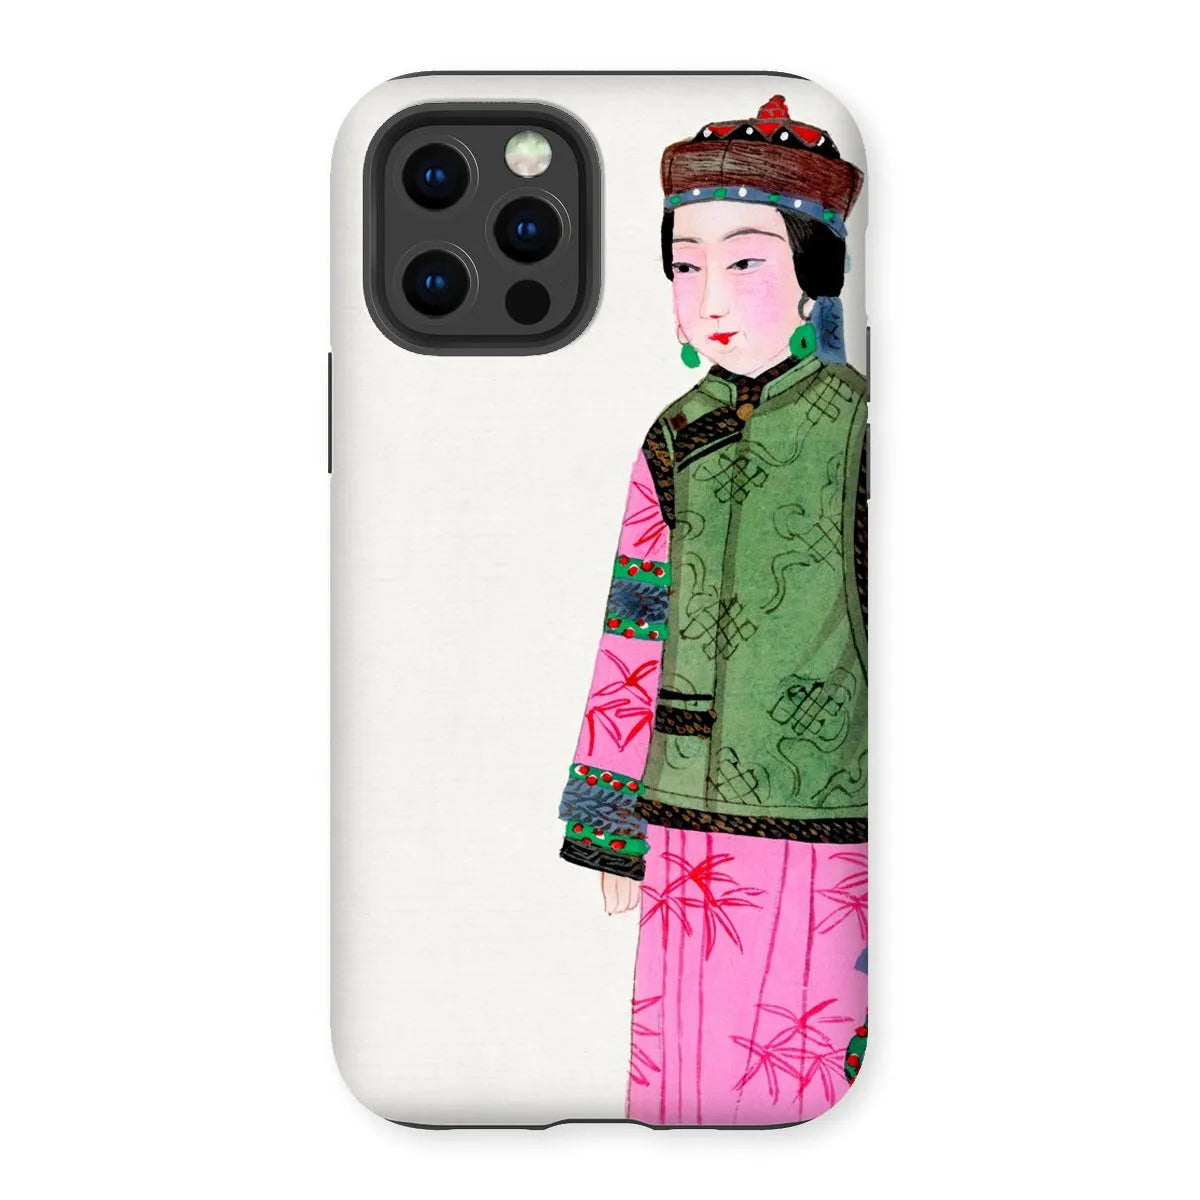 Noblewoman In Winter - Chinese Aesthetic Art Phone Case - Iphone 12 Pro / Matte - Mobile Phone Cases - Aesthetic Art